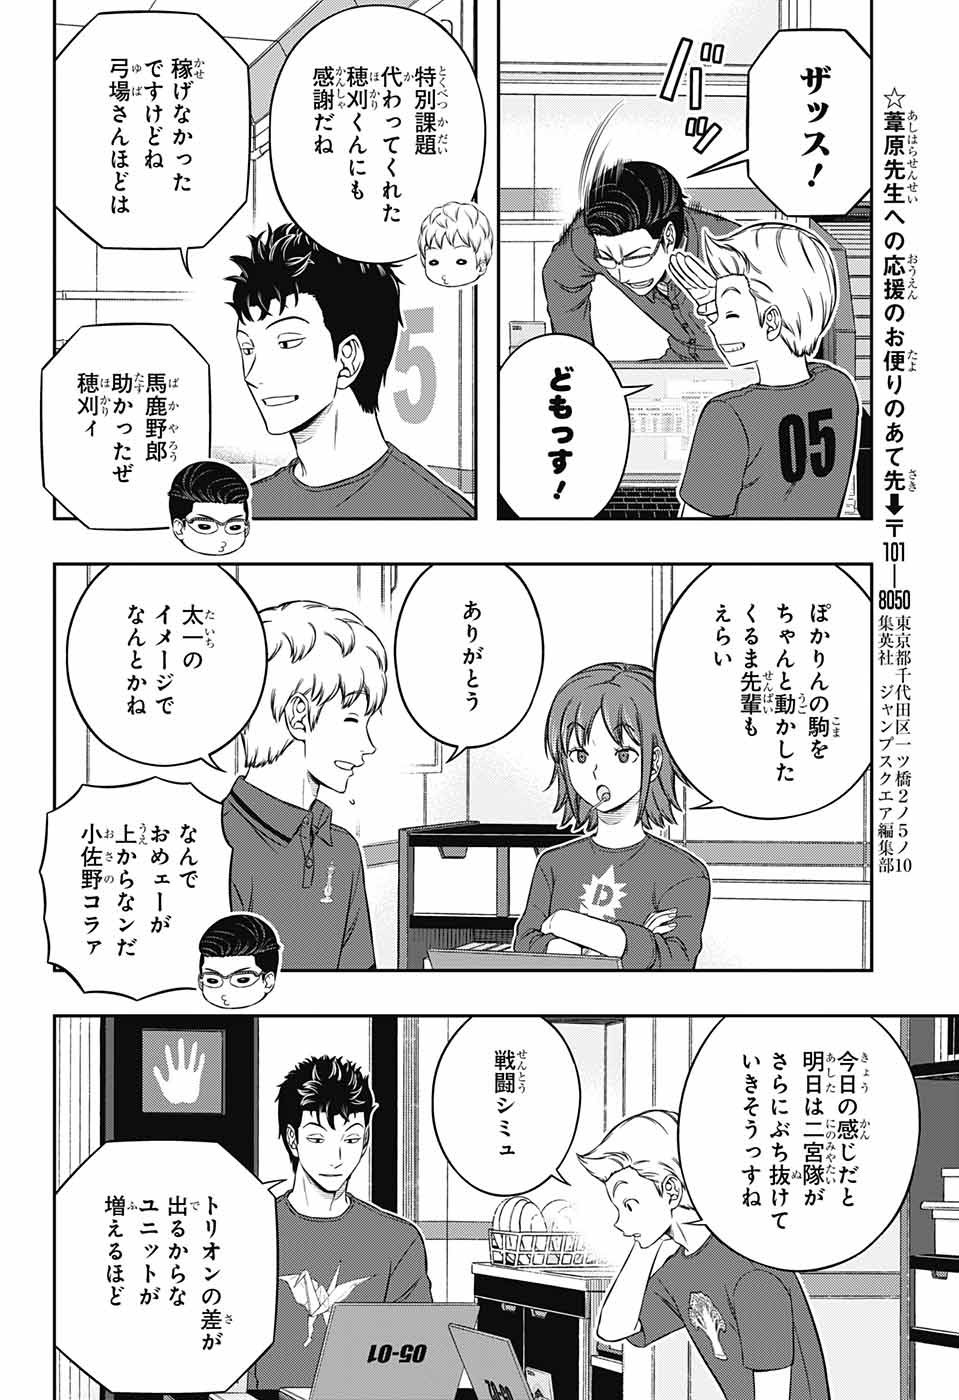 World Trigger - Chapter 226 - Page 4